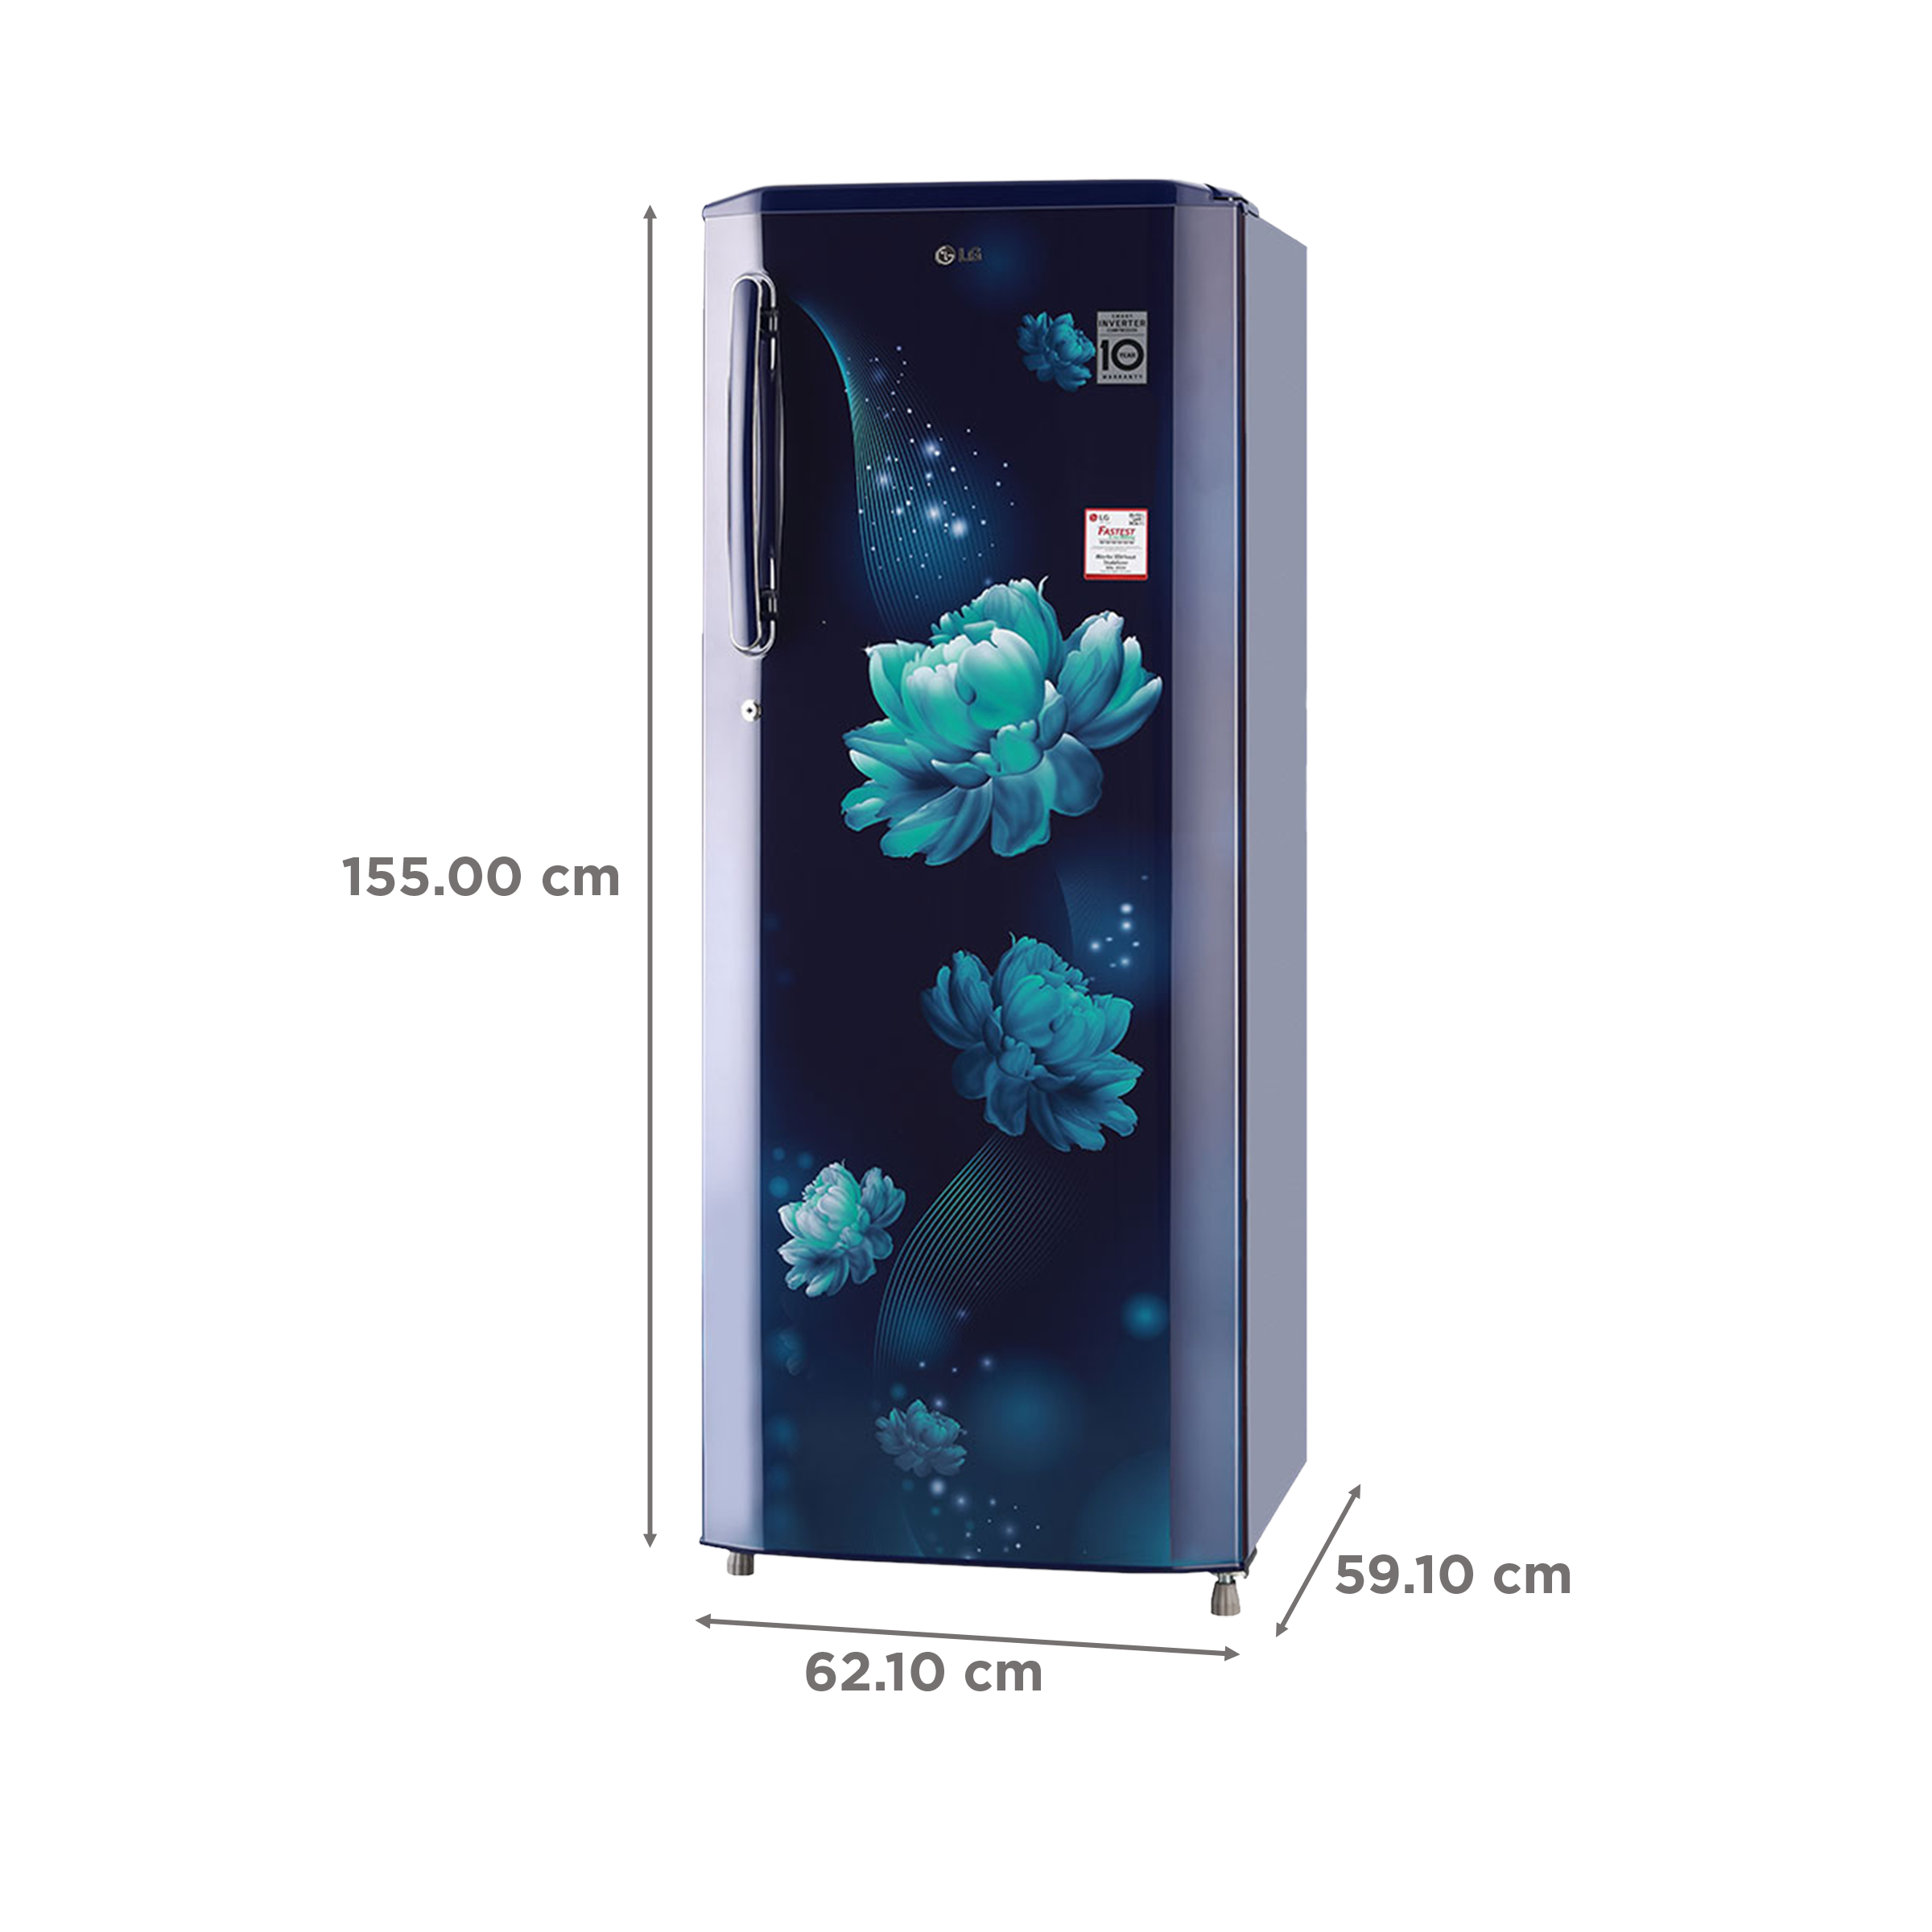 Buy LG 270 Litres 3 Star Direct Cool Single Door Refrigerator with  Stabilizer Free Operation (GL-B281BBCX.DBCZEB, Blue Charm) Online - Croma